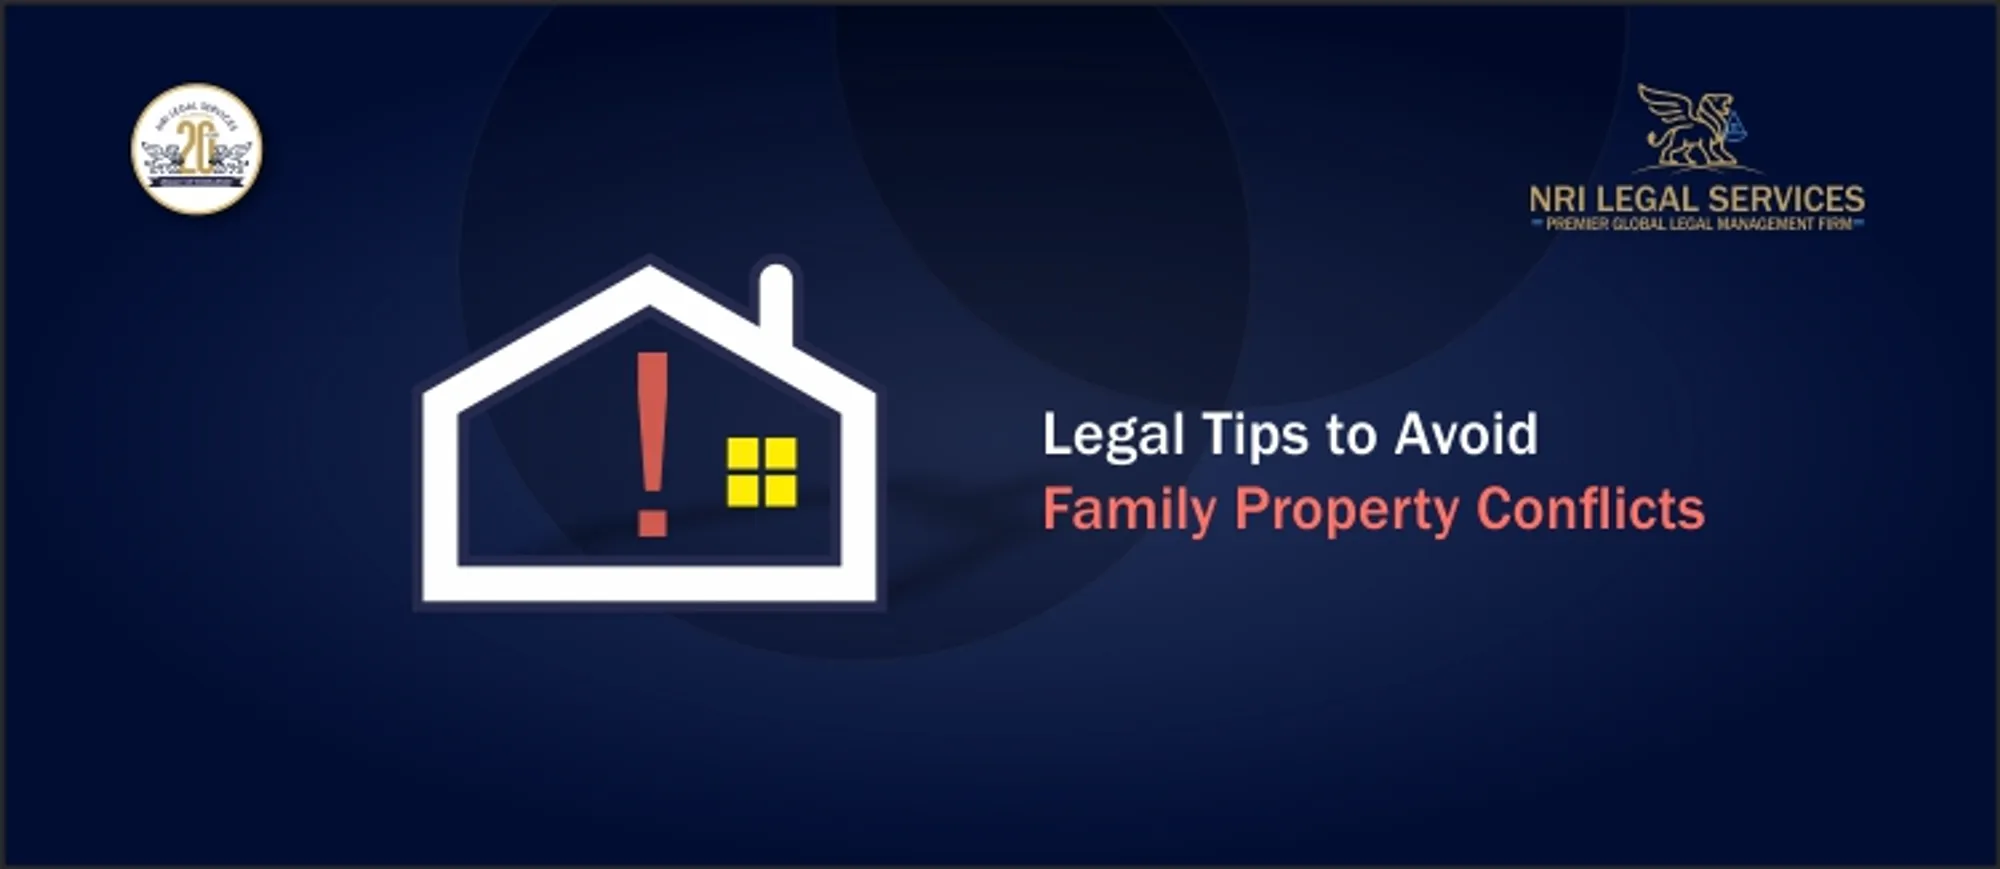 Legal tips from property dispute lawyer to avoid family property conflicts